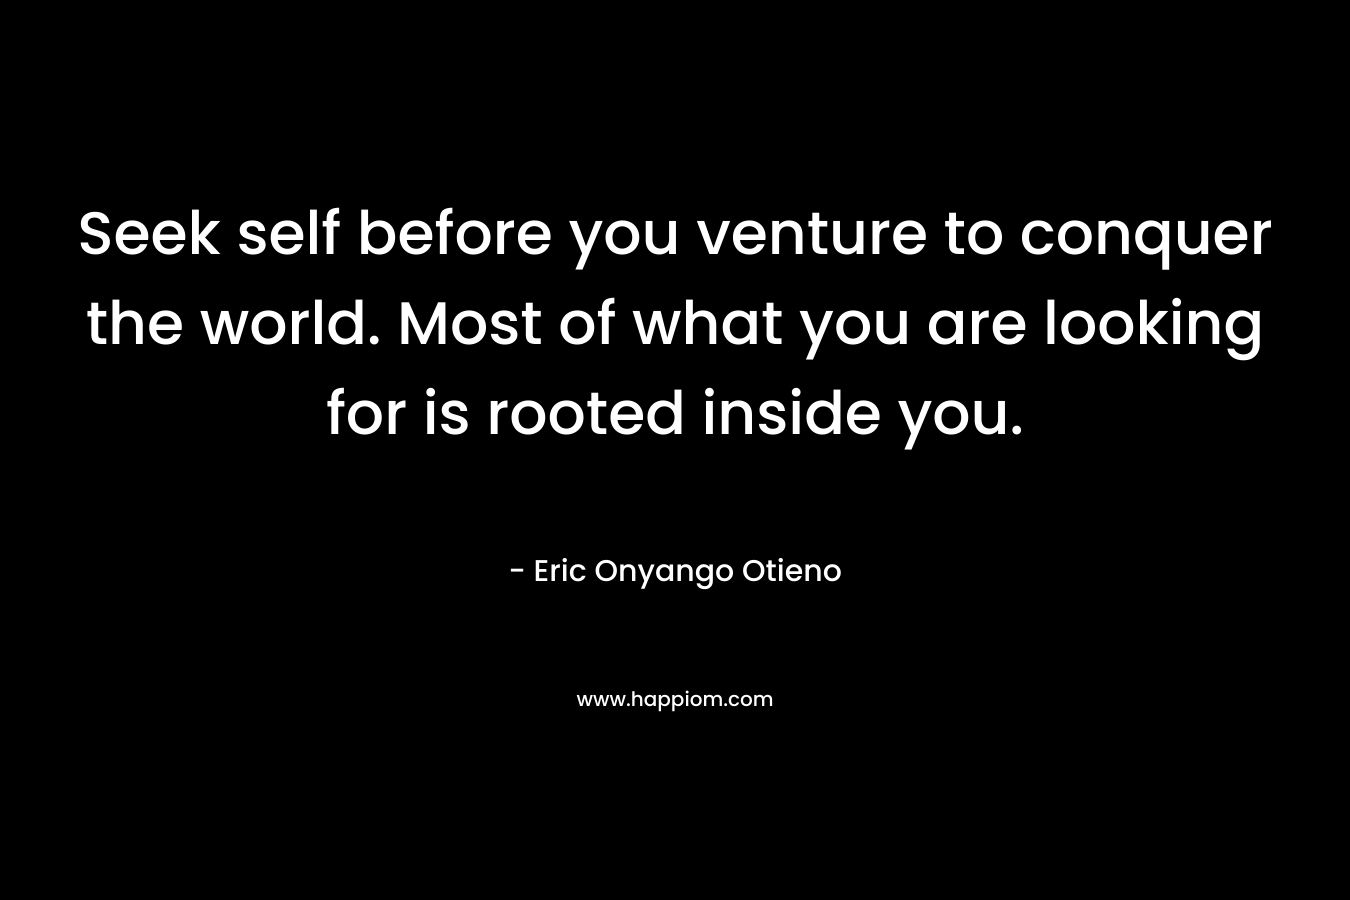 Seek self before you venture to conquer the world. Most of what you are looking for is rooted inside you. – Eric Onyango Otieno